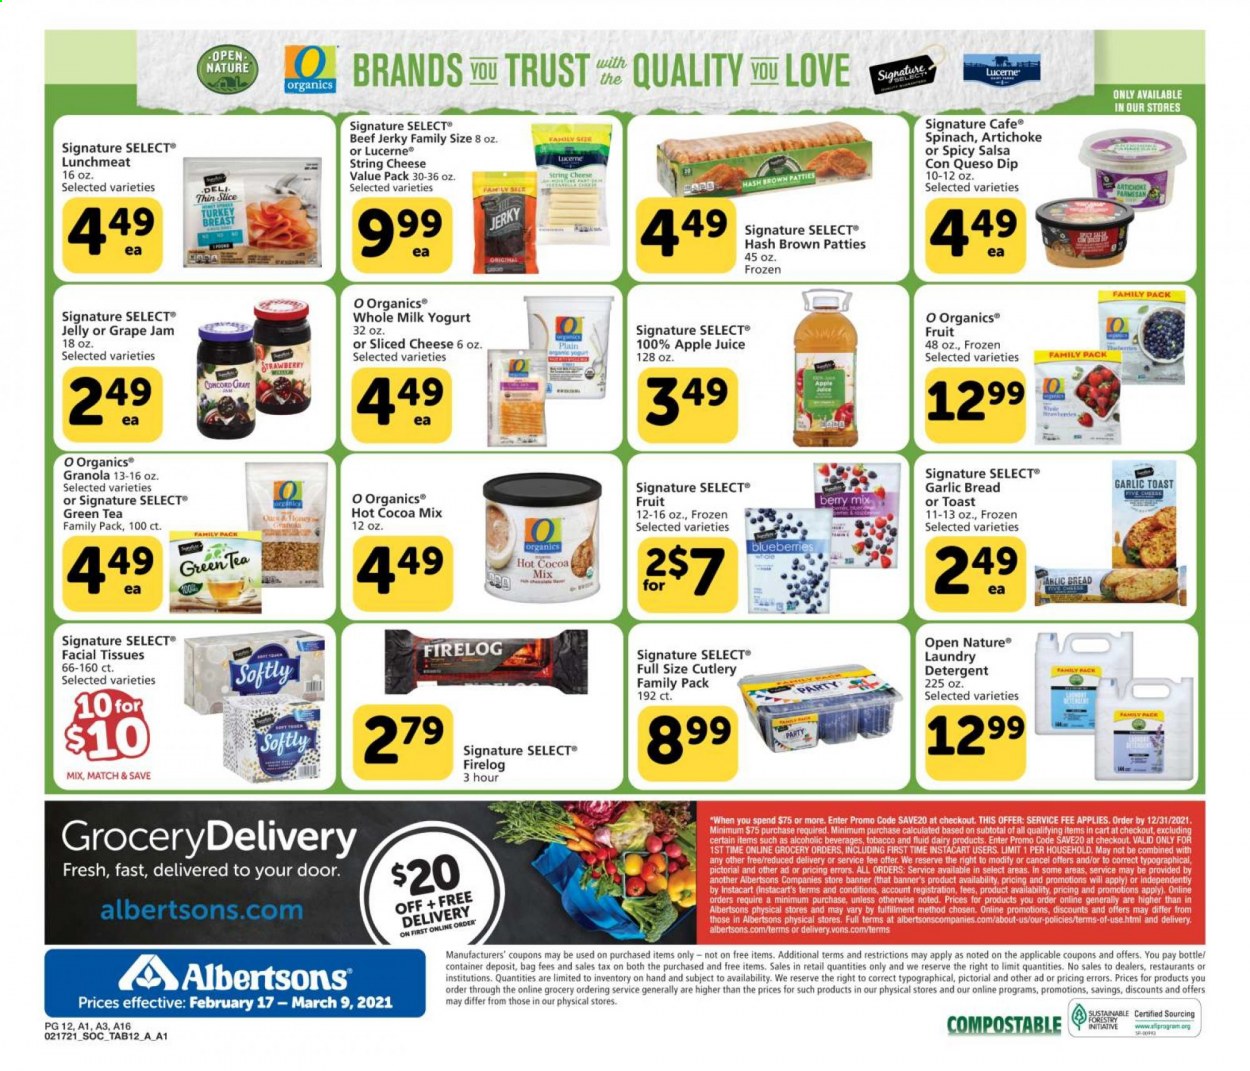 thumbnail - Albertsons Flyer - 02/17/2021 - 03/09/2021 - Sales products - blueberries, bread, toast bread, beef jerky, jerky, lunch meat, sliced cheese, string cheese, cheese, yoghurt, jelly, milk, salsa, dip, spinach, granola, fruit jam, apple juice, juice, hot cocoa, green tea, tea, turkey breast, tissues, detergent, laundry detergent, facial tissues, Trust. Page 12.